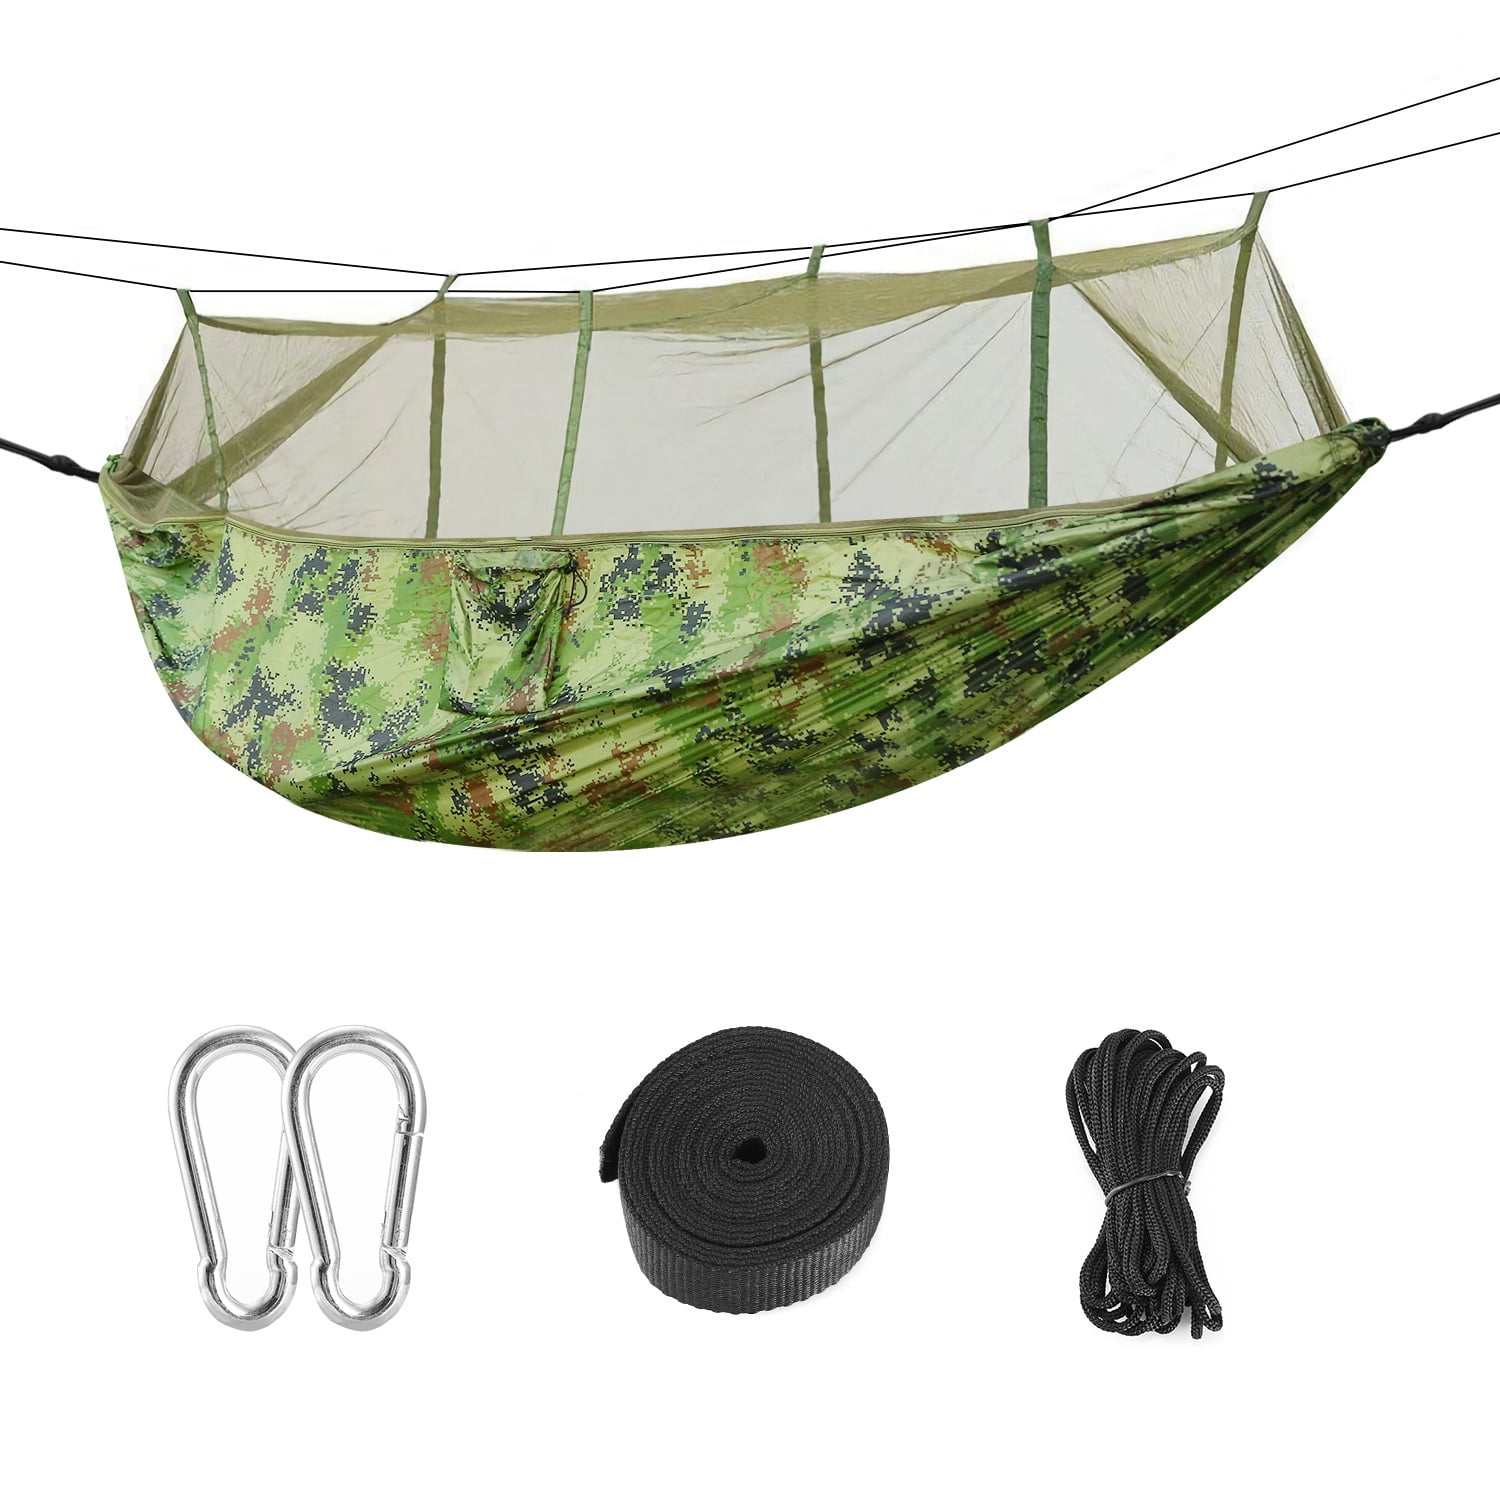 600lbs Load Double Person Hammock w/Mosquito Net Travel Hanging Bed Swing Chair 